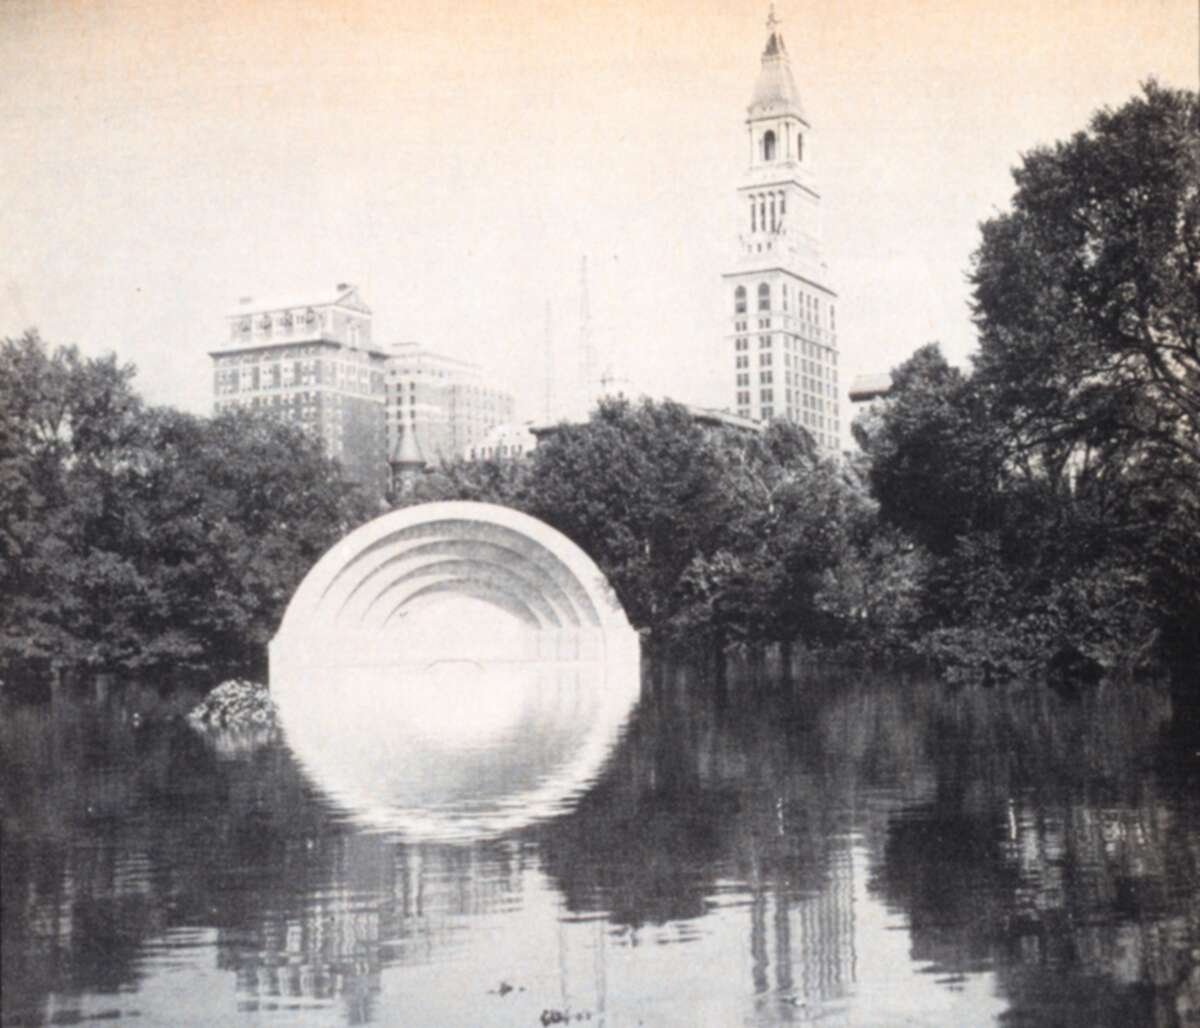 The Music Shell in Bushnell Park which was now functioning as a reflecting pool. Flooding in the aftermath of the 1938 New England Hurricane. Hartford, Connecticut - September 22, 1938